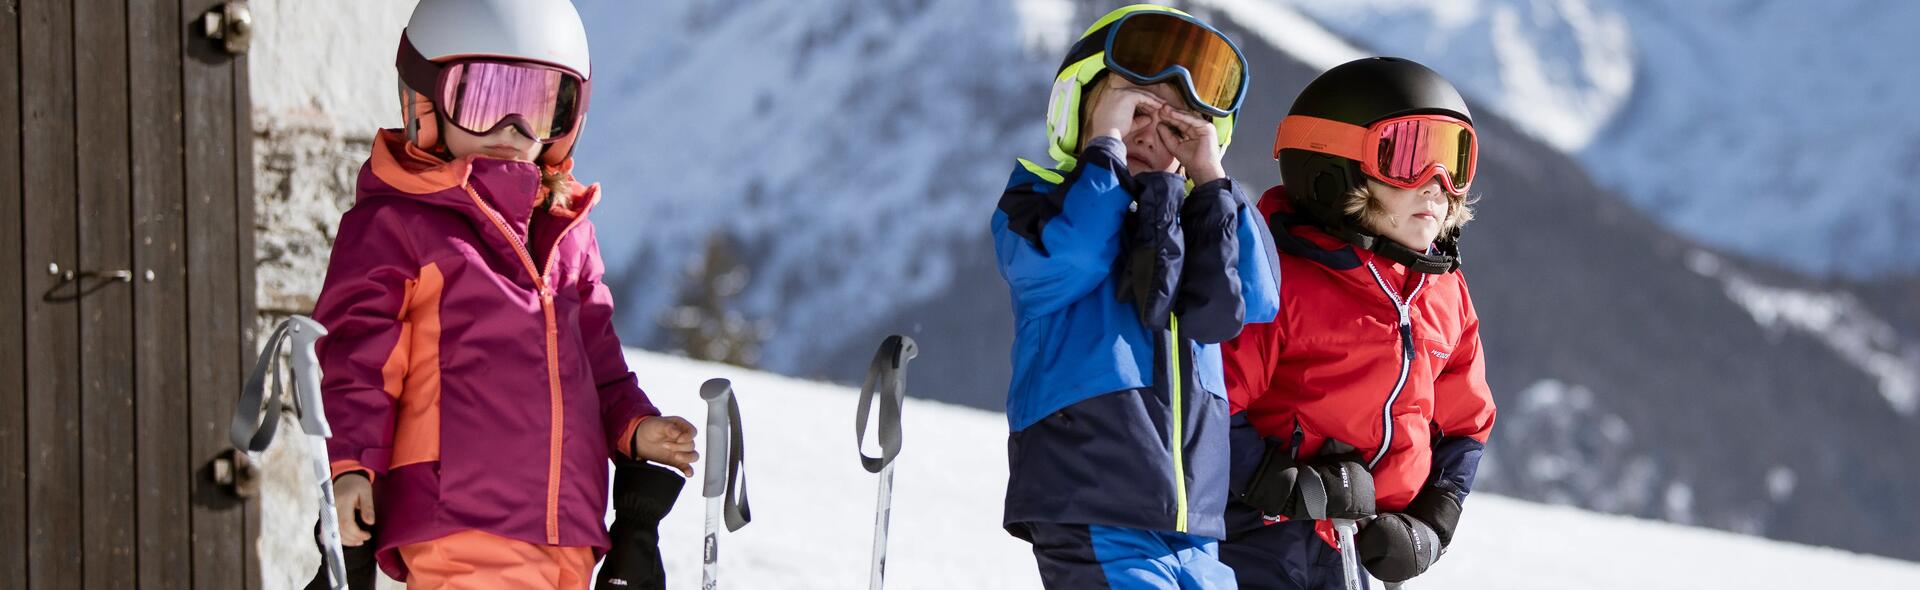 Skiing holidays with the little ones... is possible!